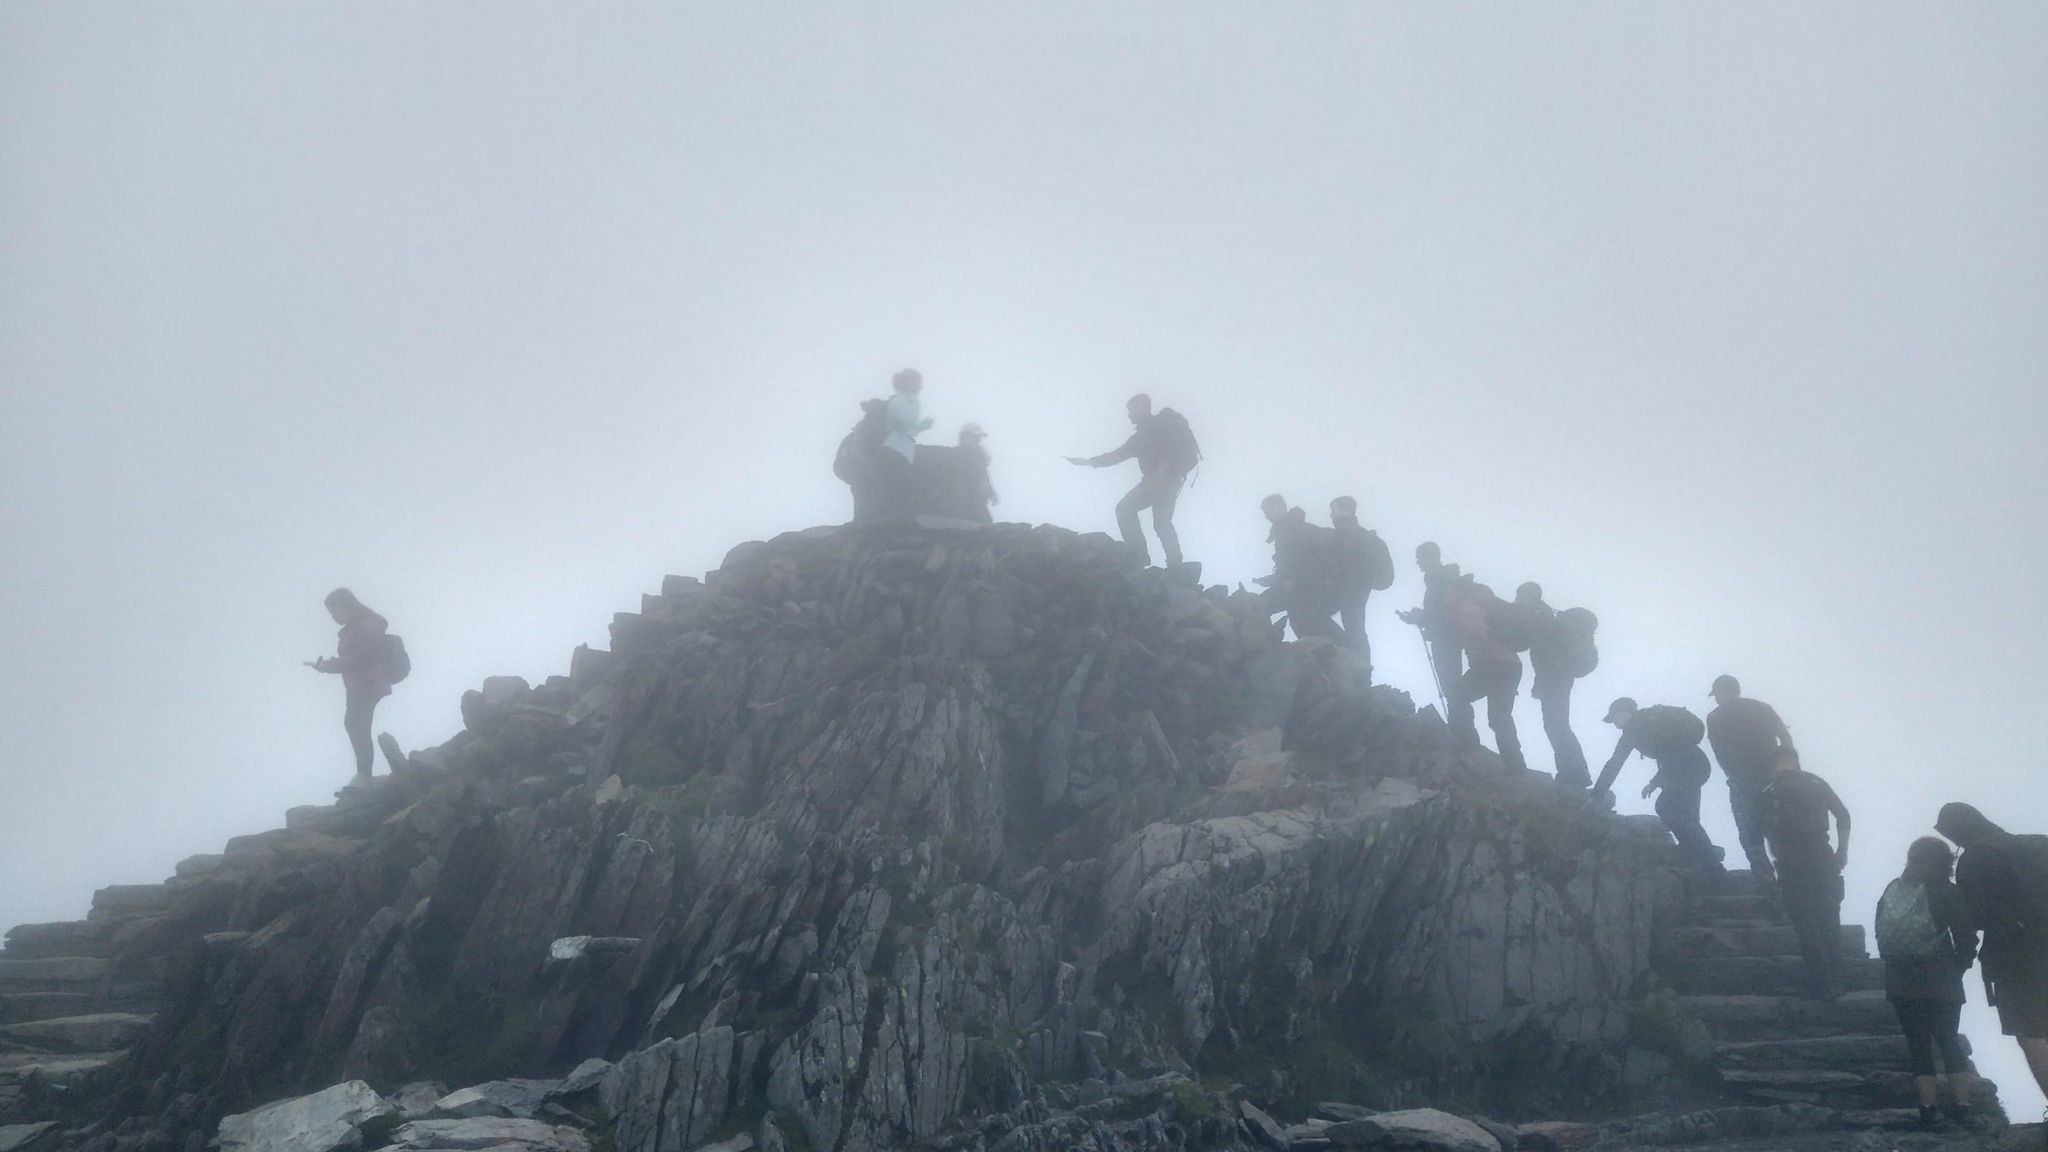 Figures climbing to the summit of Yr Wyddfa (Snowdon) in Wales